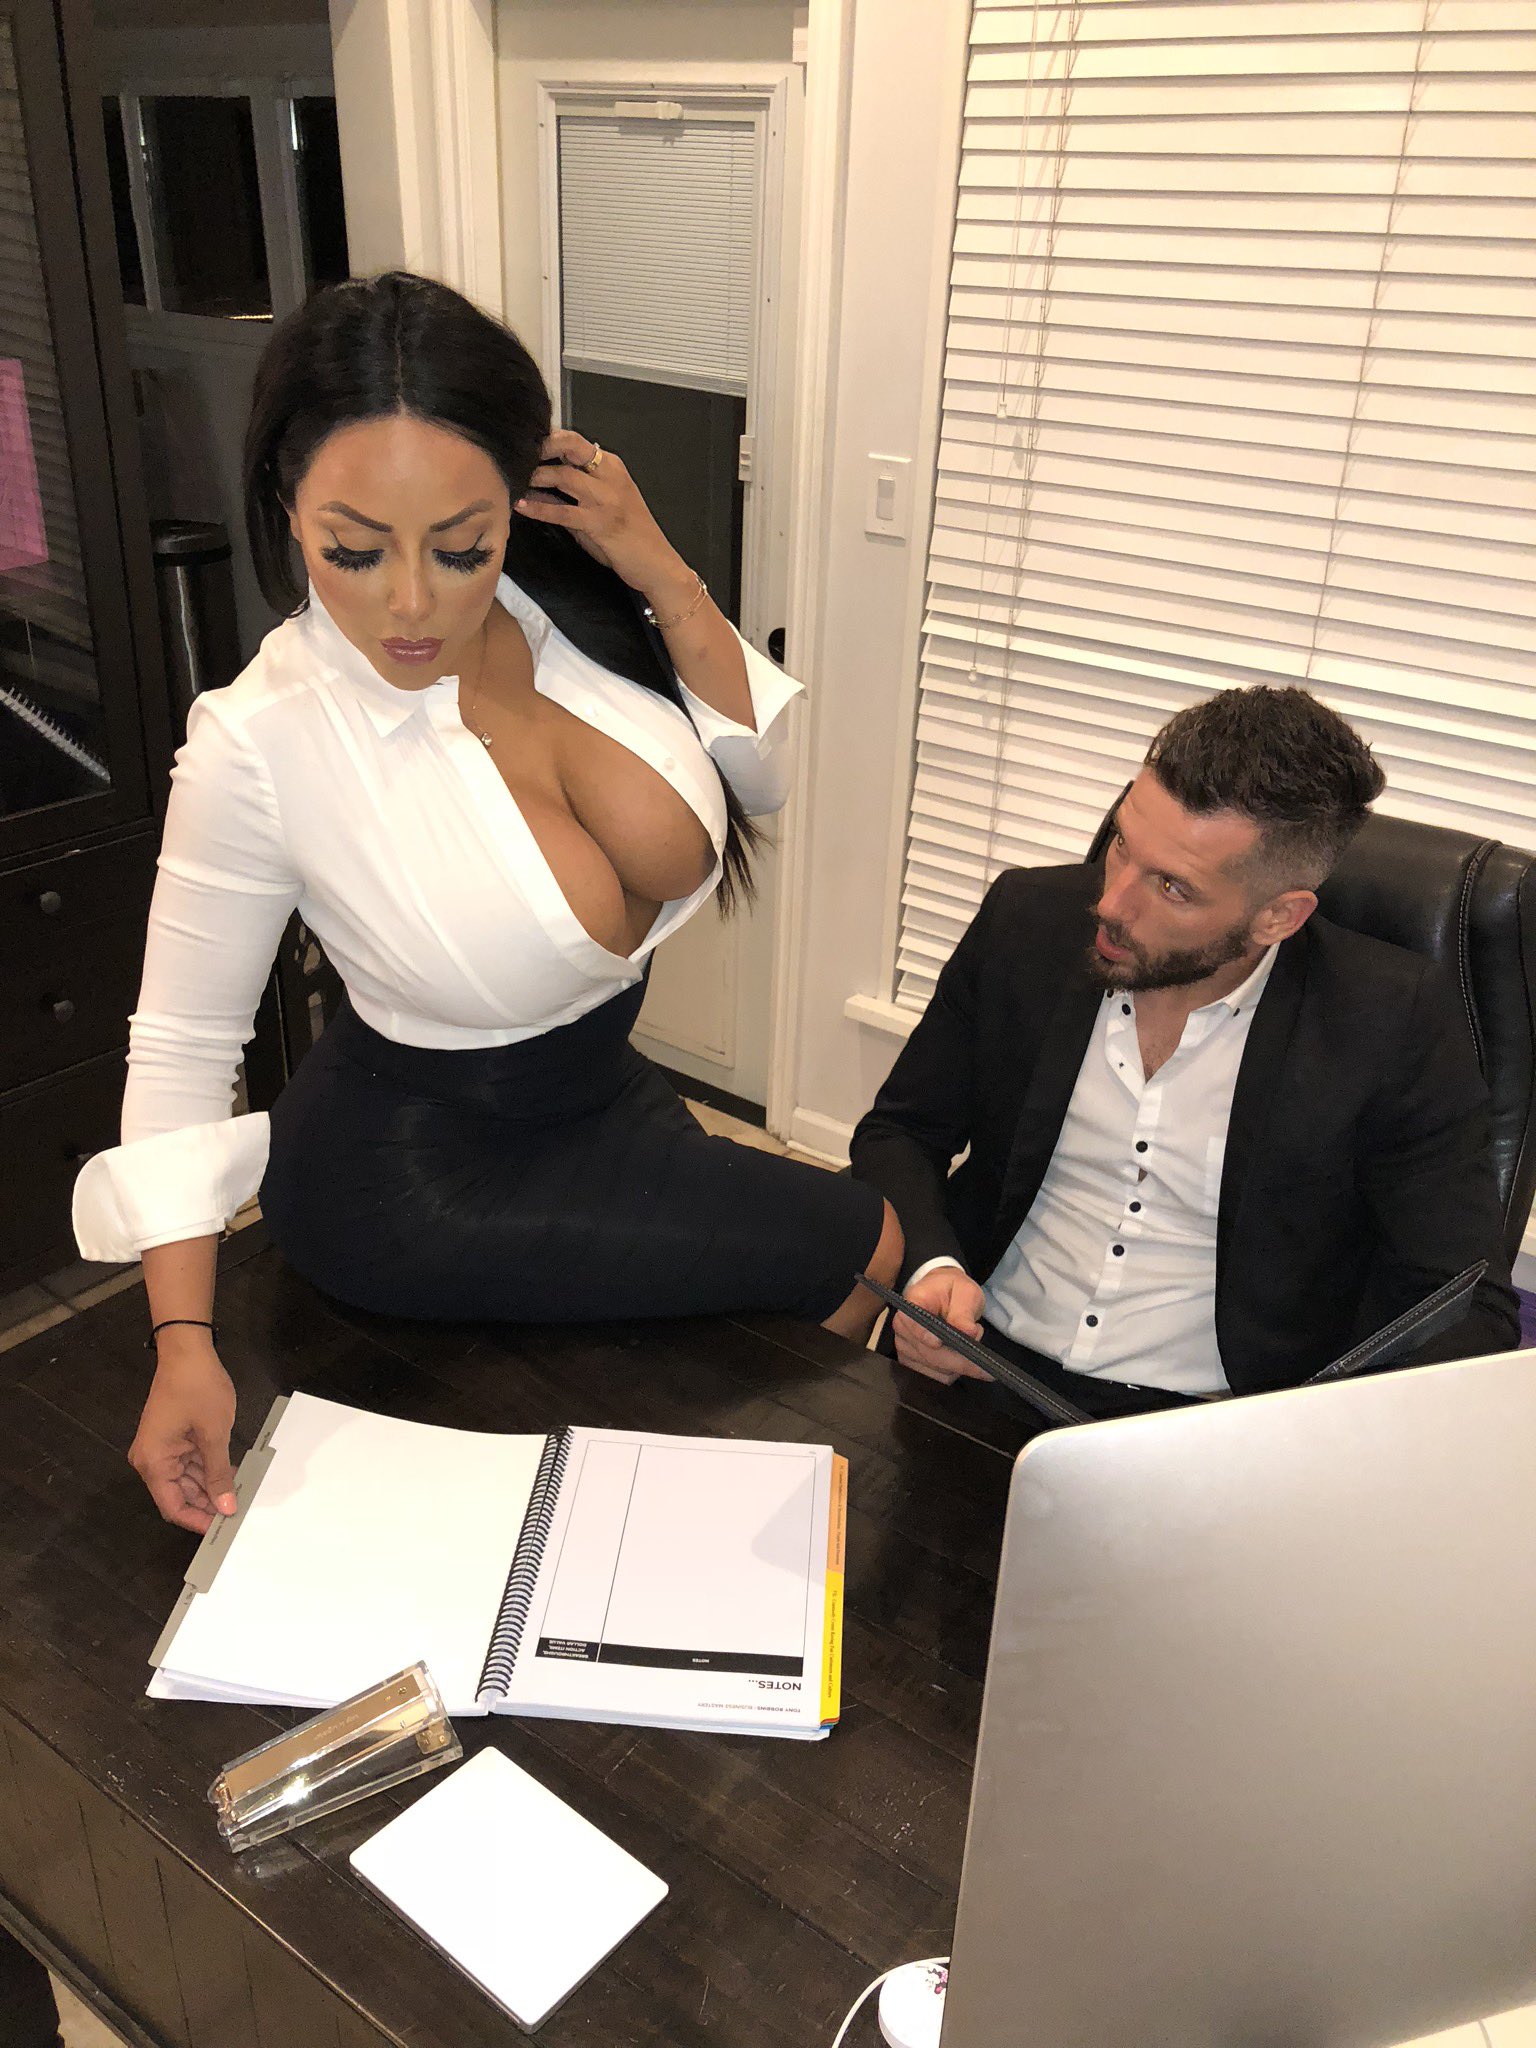 Pornstrz Office - TW Pornstars - Kiara Mia. Twitter. Putting in overtime at the office,  helping my boss with. 5:20 AM - 8 Oct 2021